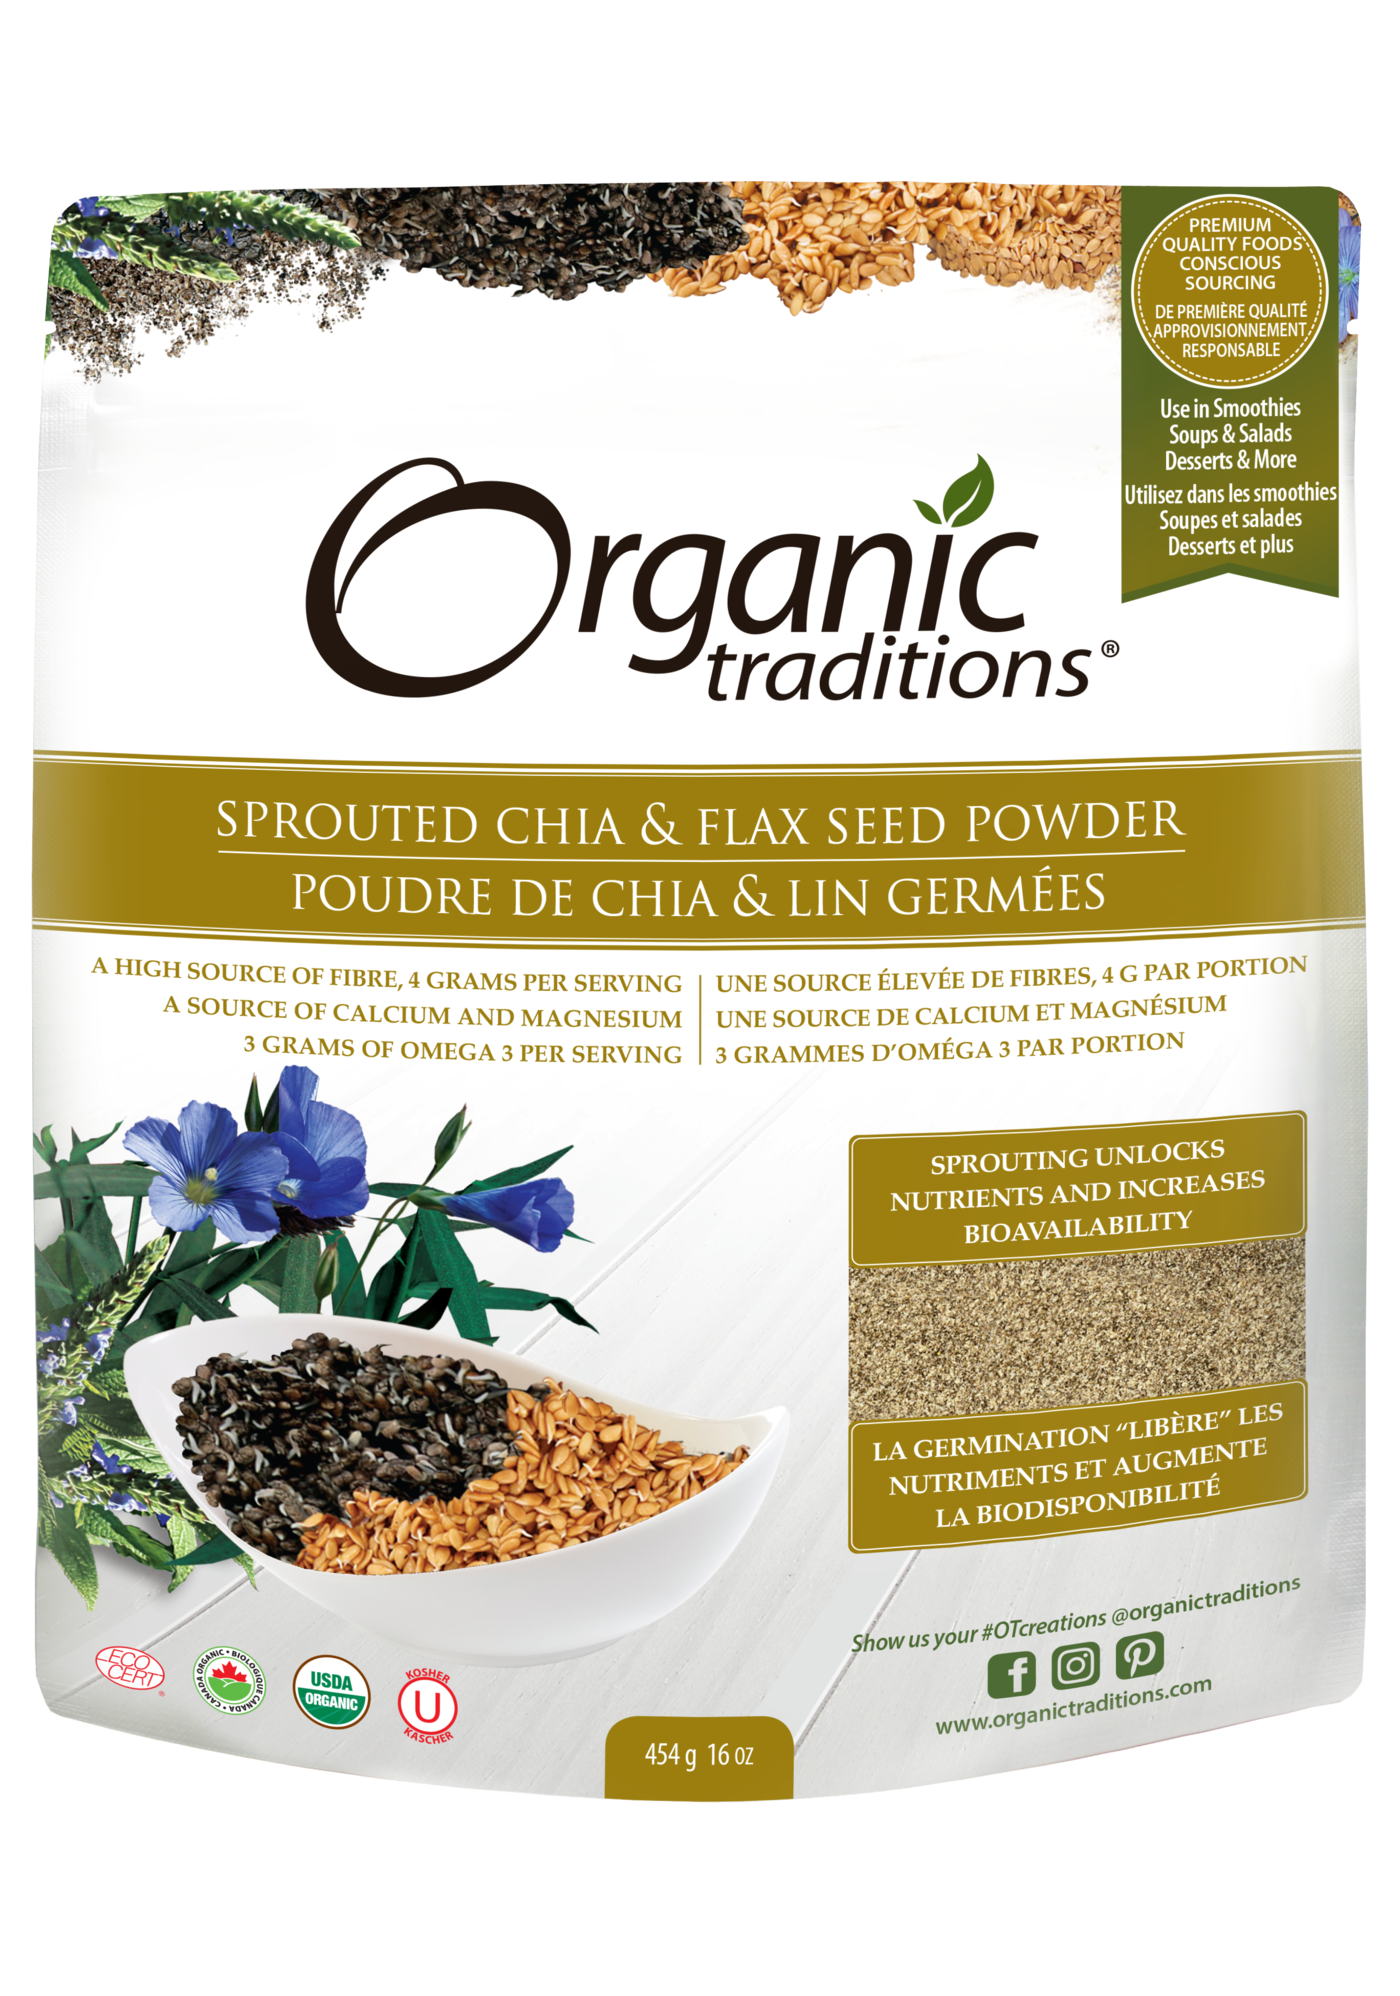 Organic Traditions - Chia & Flax Seed Powder - Sprouted - 454g